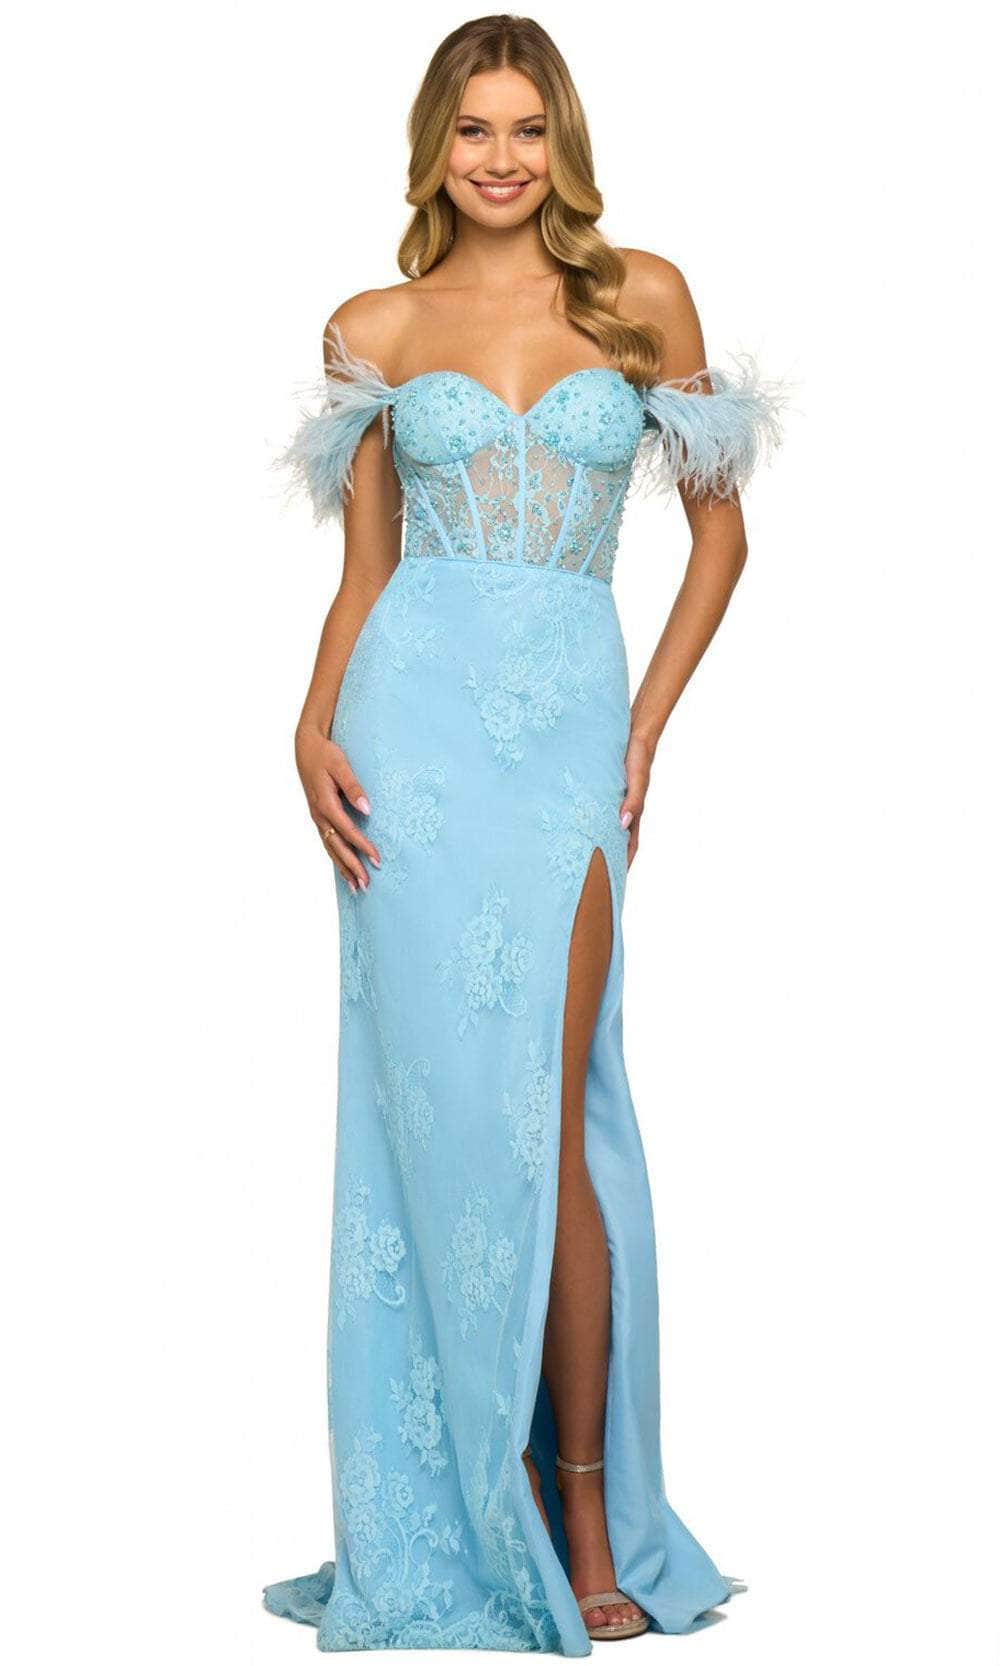 Image of Sherri Hill 55068 - Feathered Sleeve Lace Evening Gown